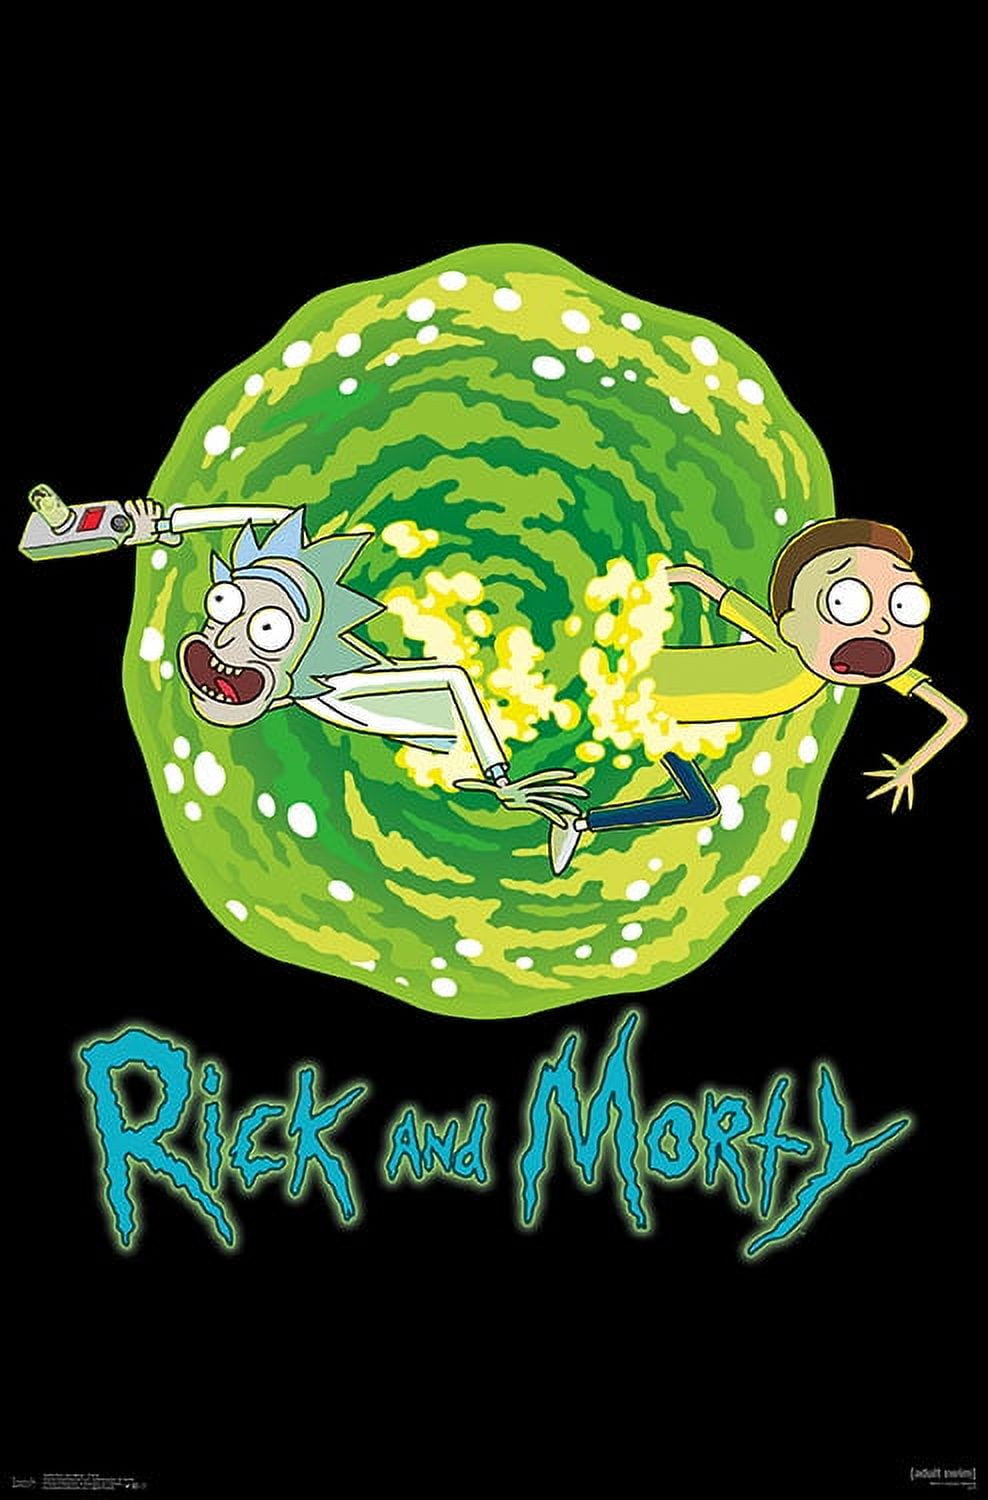 POSTER STOP ONLINE Rick and Morty - TV Show Poster/Print (Portal) (Size 24  x 36)